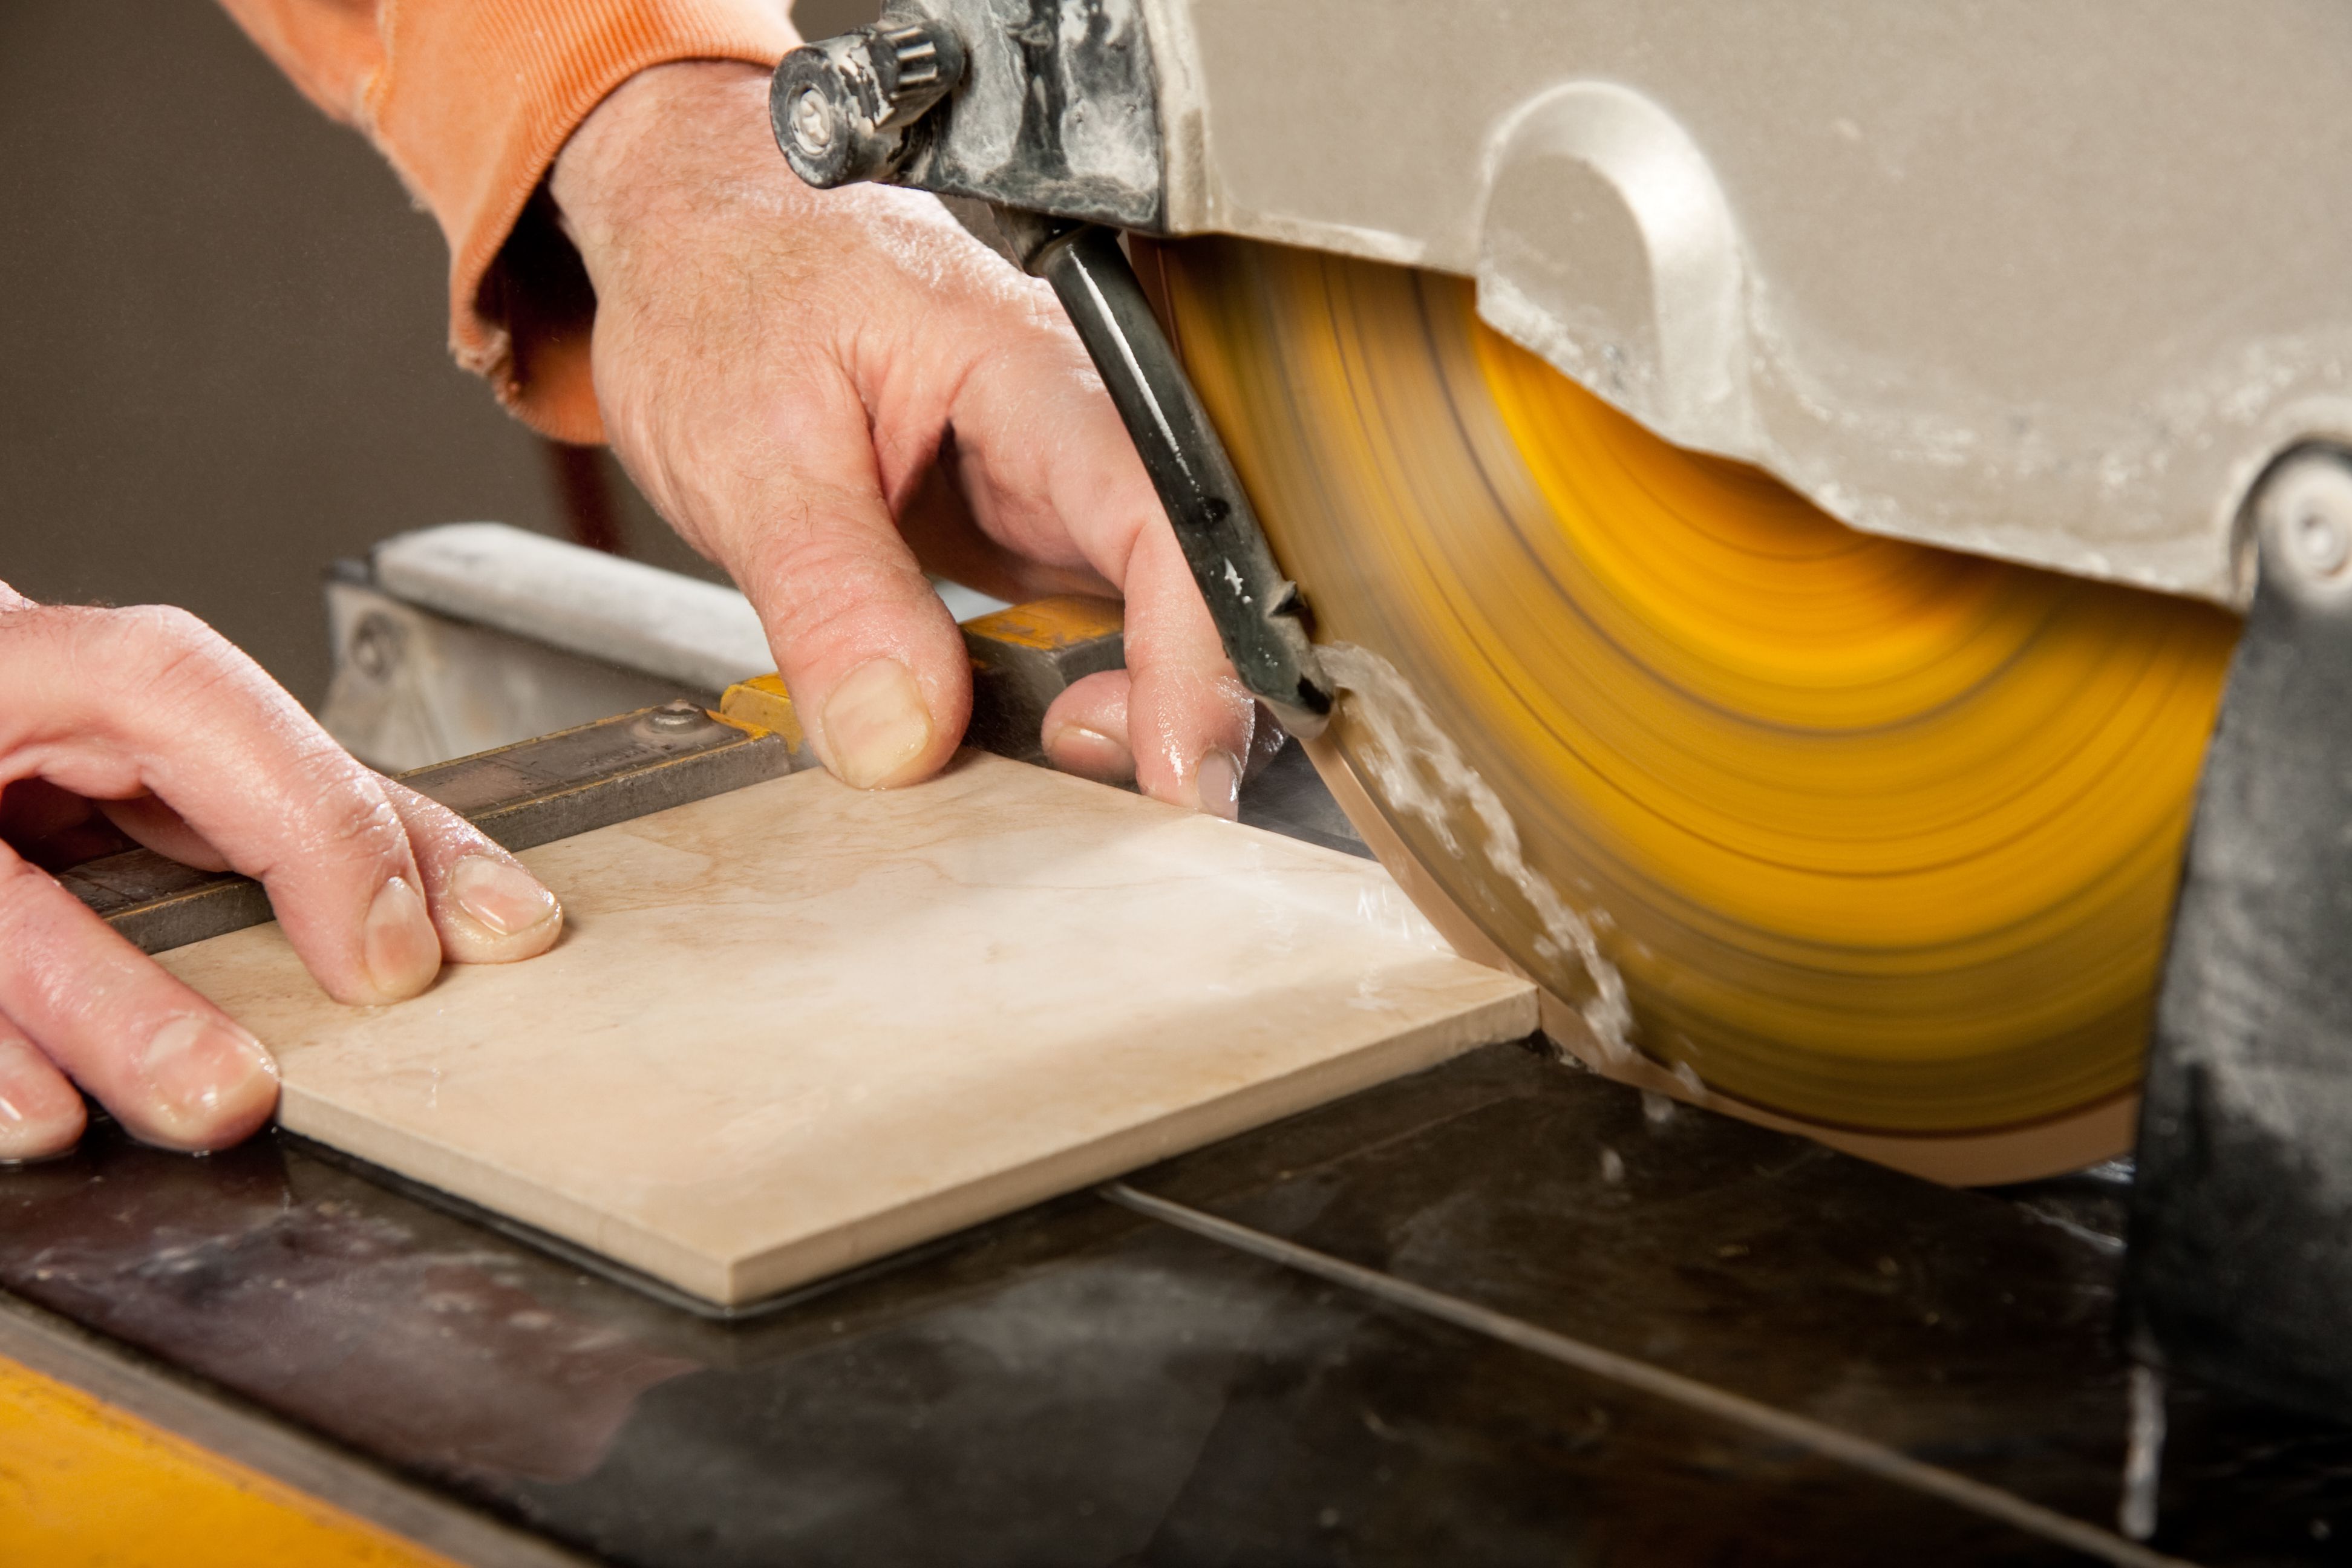 How to Use a Wet Tile Saw